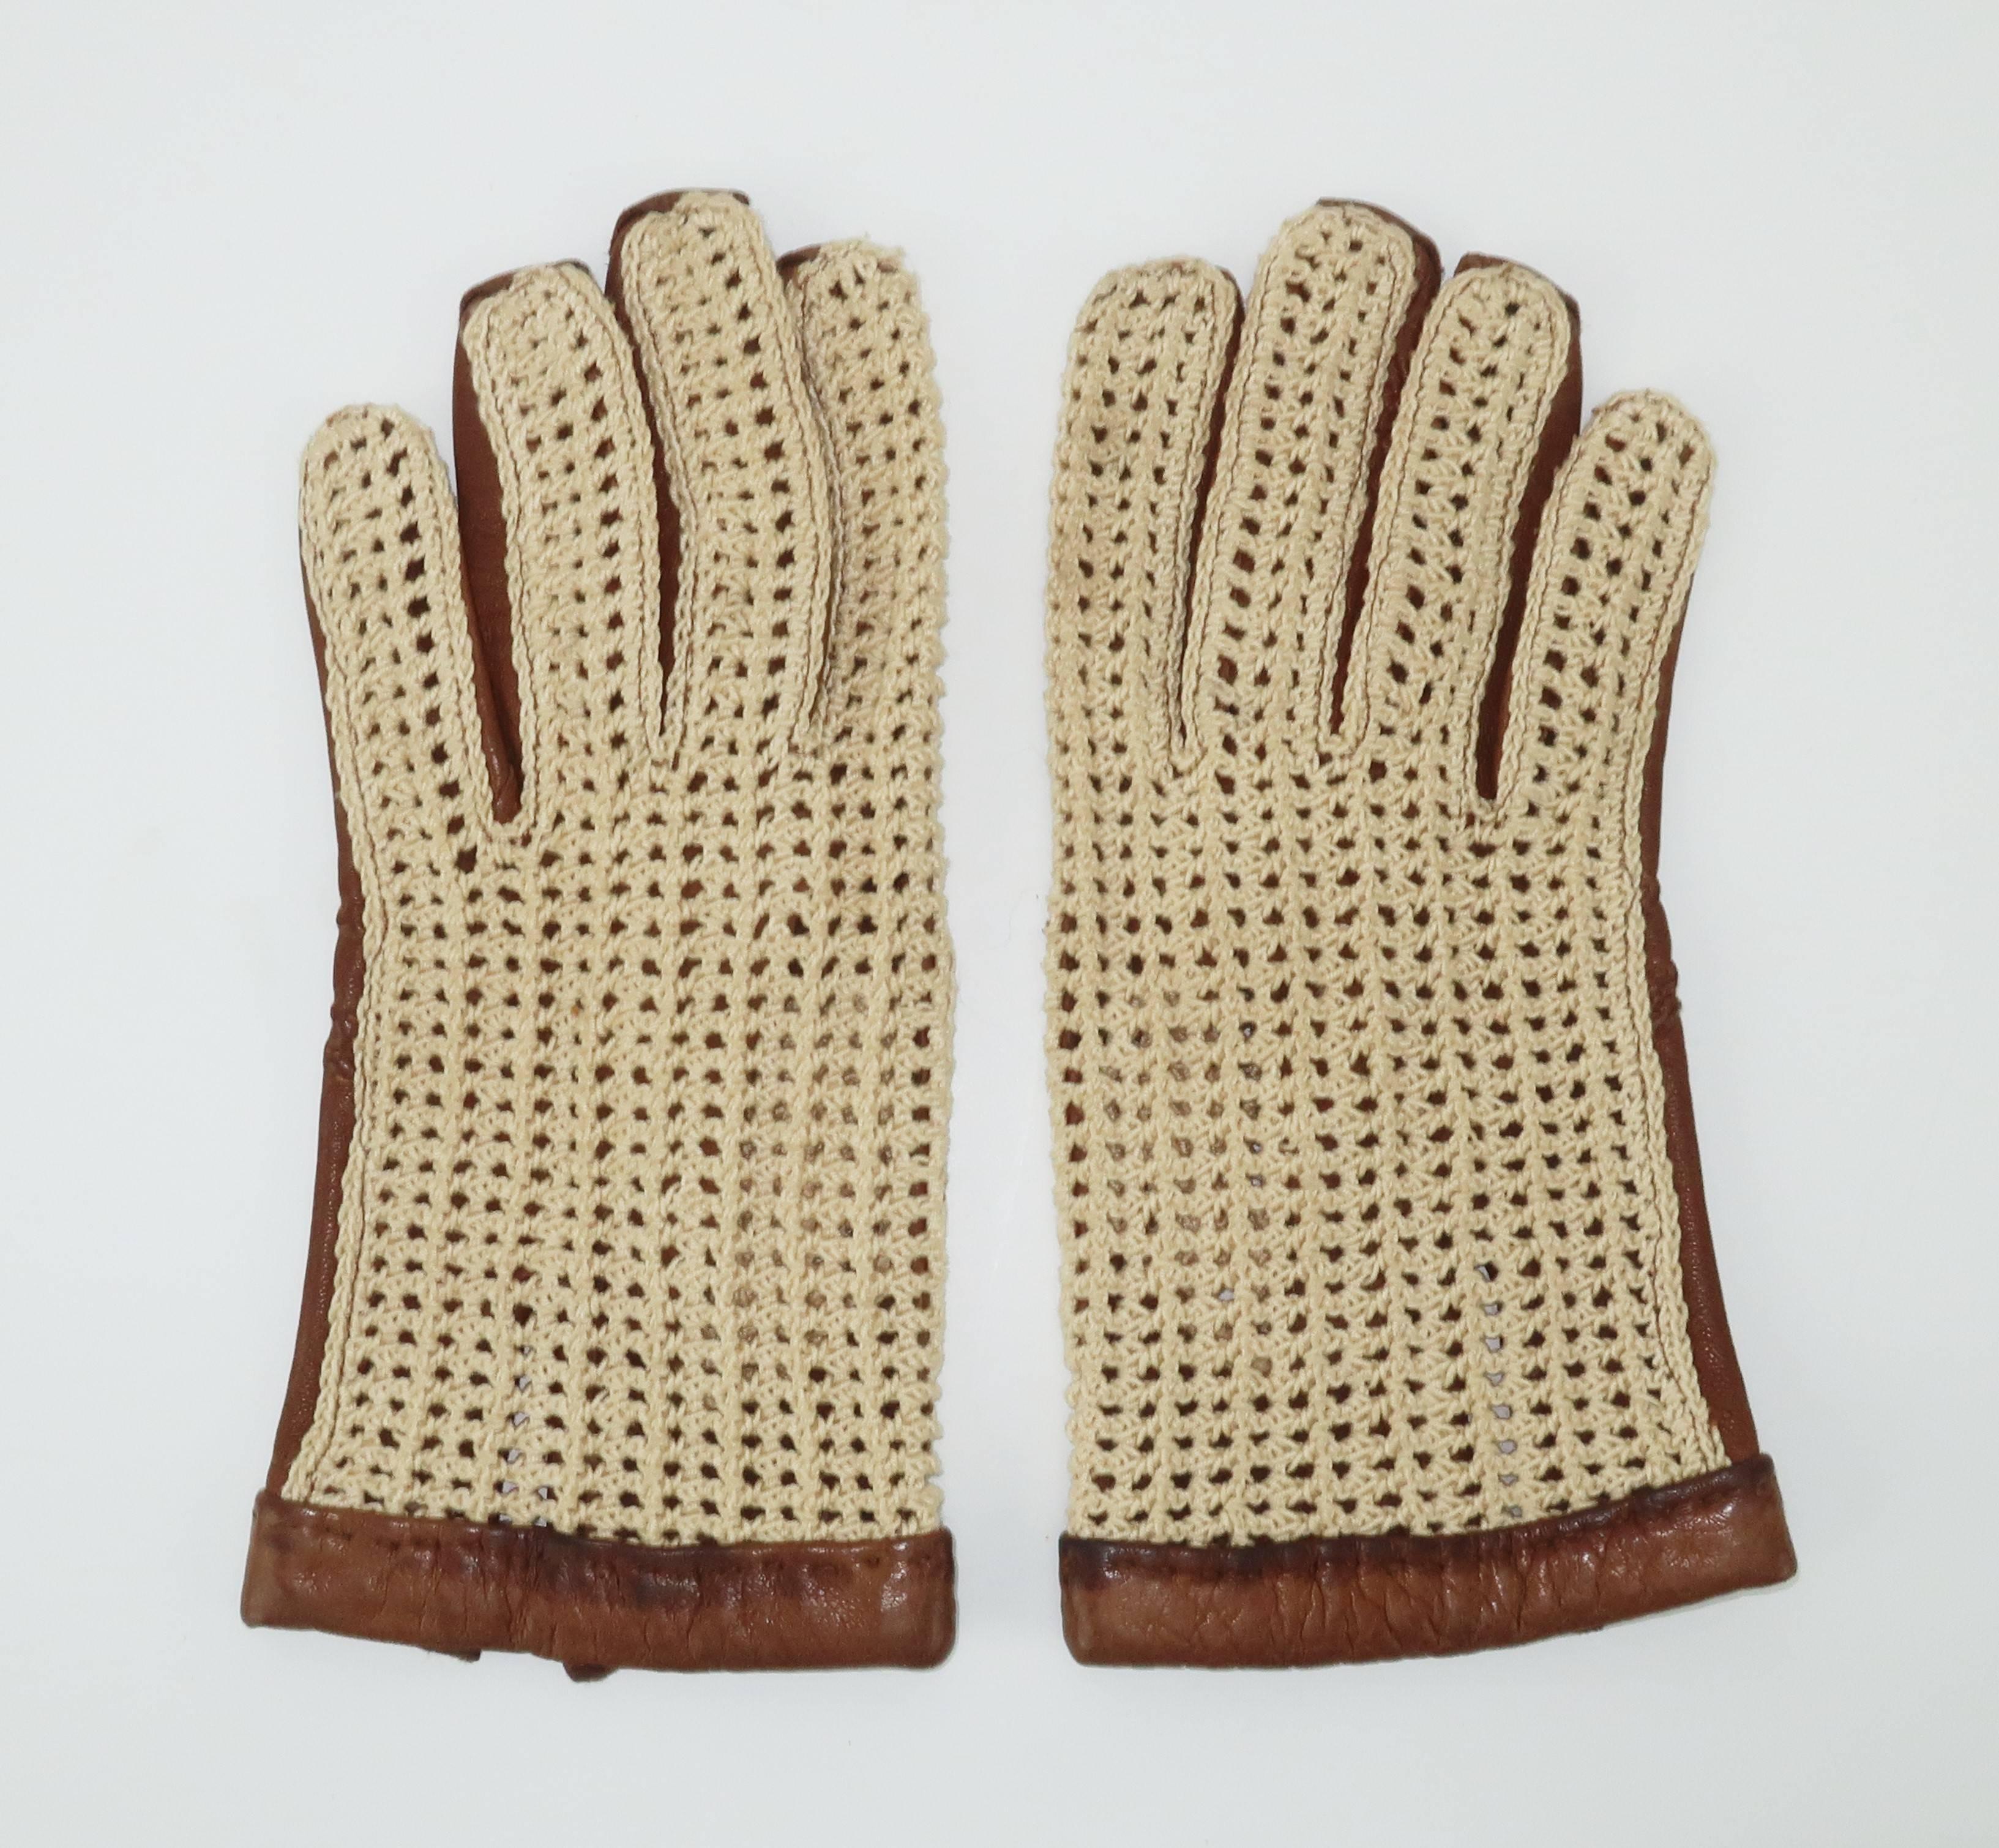 These two tone leather and crochet knit gloves are a fashionable fix for a sporty warm weather look.  The cognac color leather is stitched on the palm side to provide traction for gripping and the natural wheat color knit has an open weave for